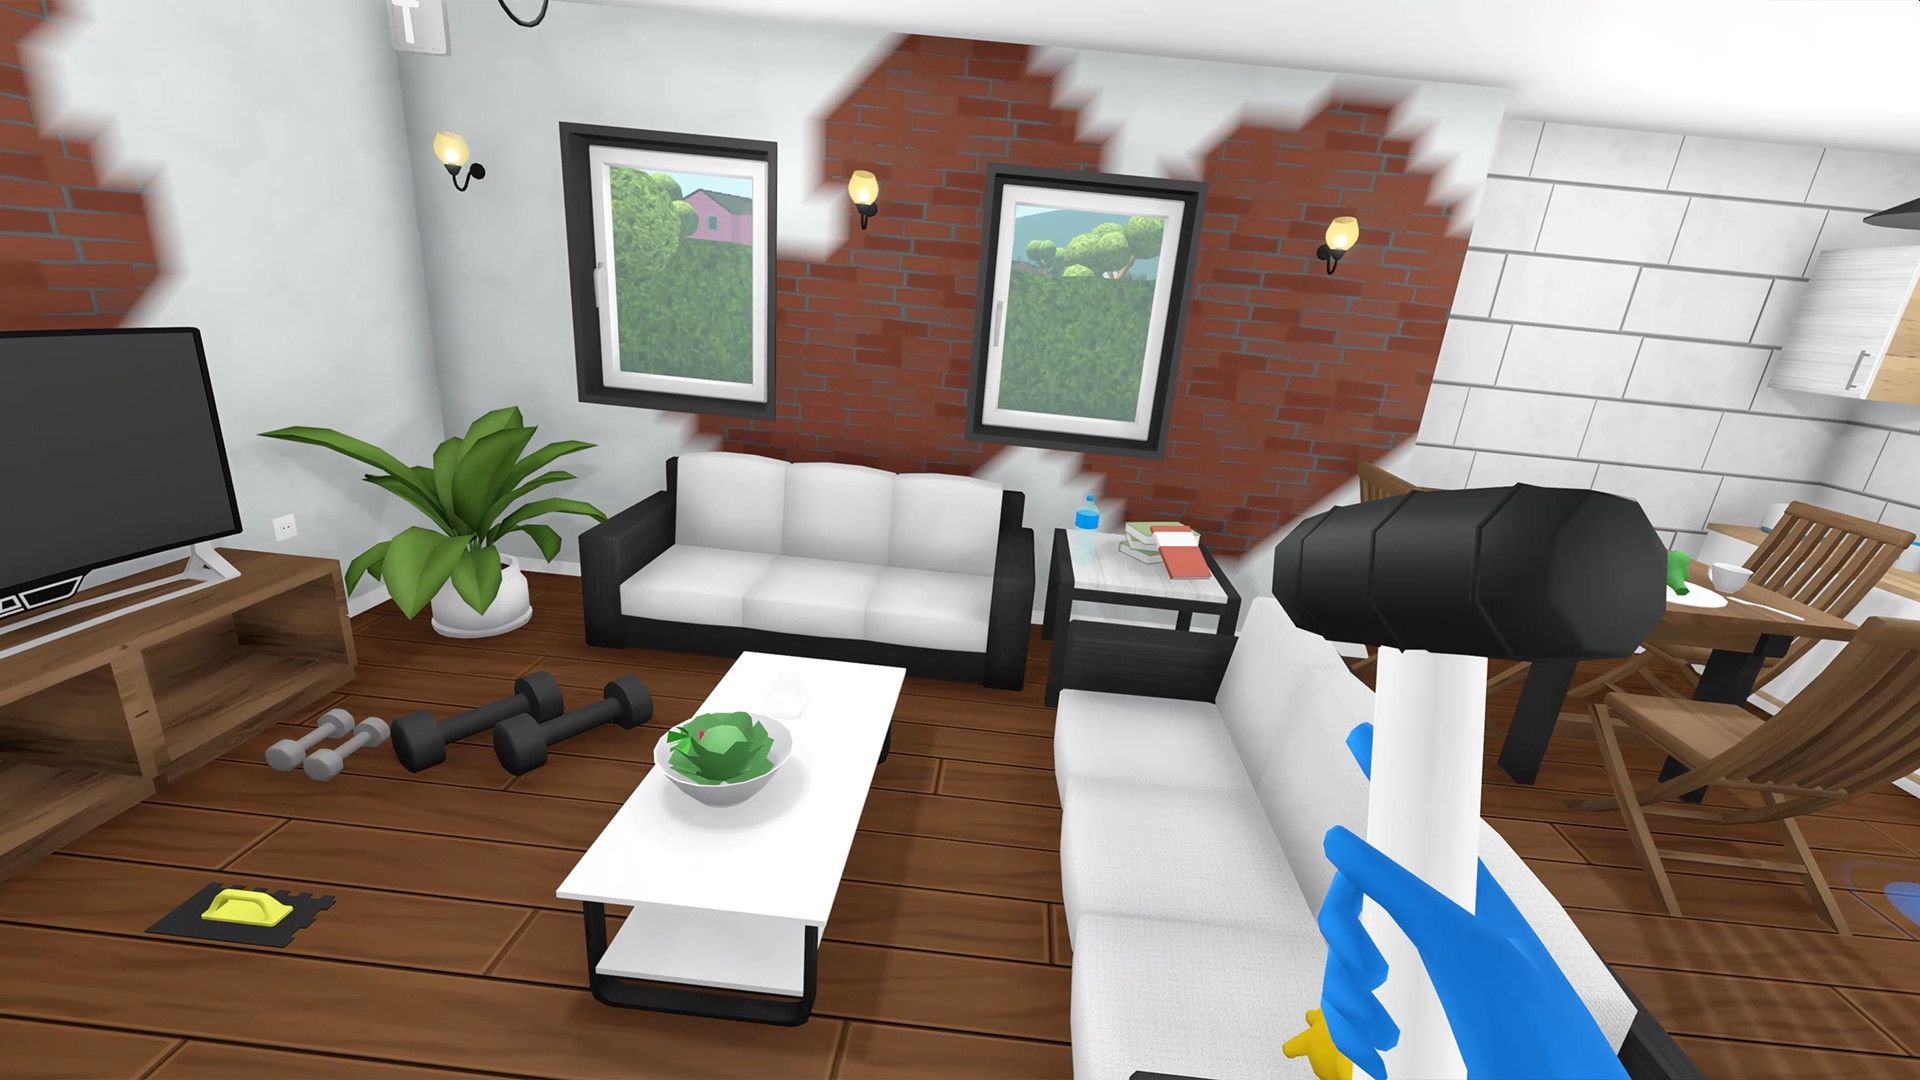 Frozen District's House Flipper VR Makes Home Renovation More Realistic And Launches Tomorrow